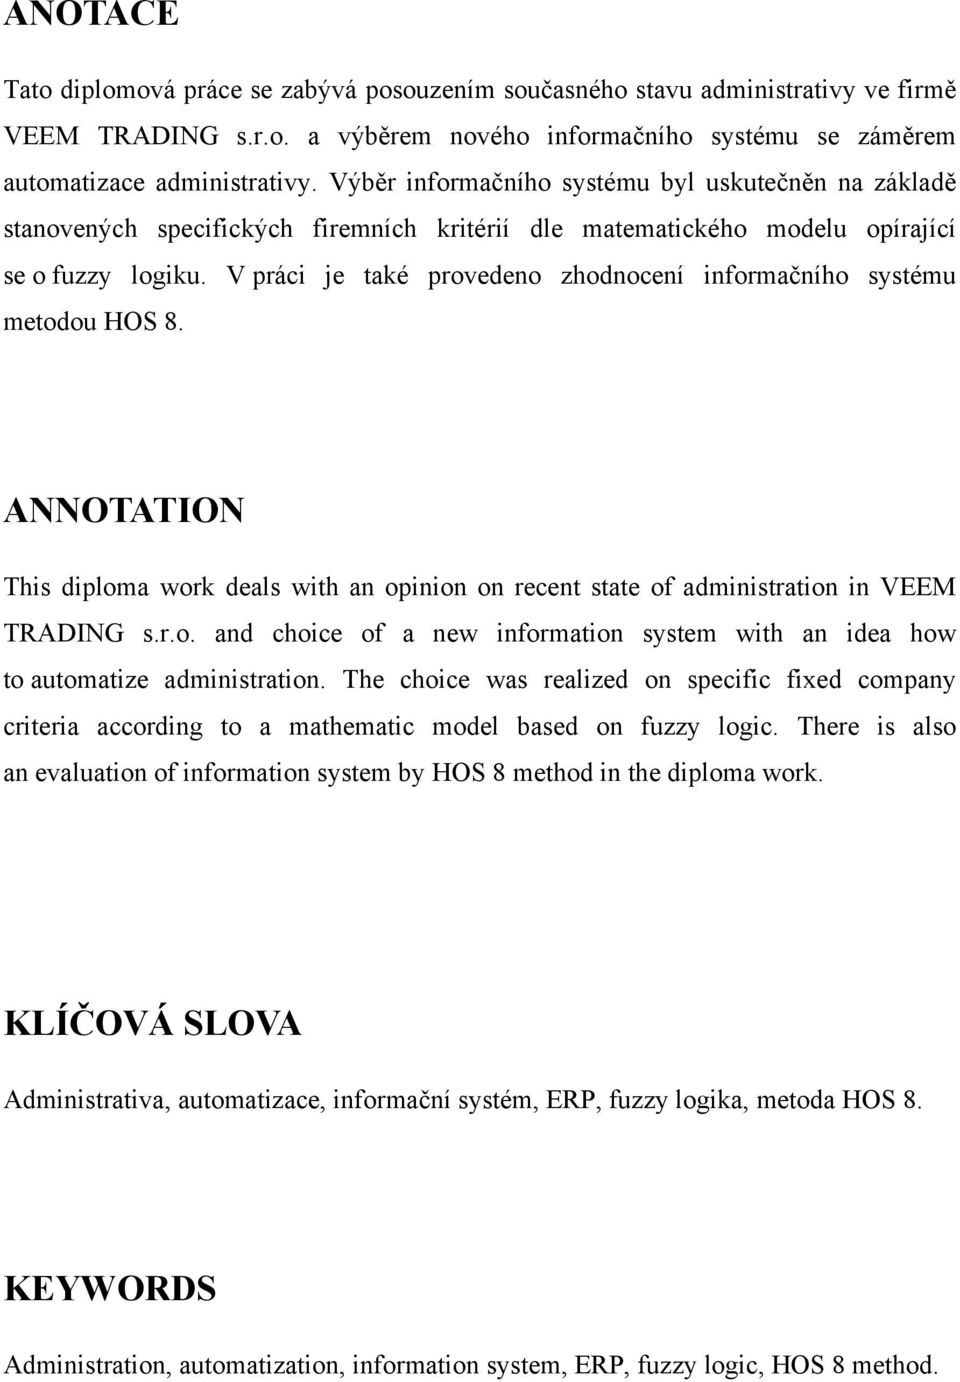 V práci je také provedeno zhodnocení informačního systému metodou HOS 8. ANNOTATION This diploma work deals with an opinion on recent state of administration in VEEM TRADING s.r.o. and choice of a new information system with an idea how to automatize administration.